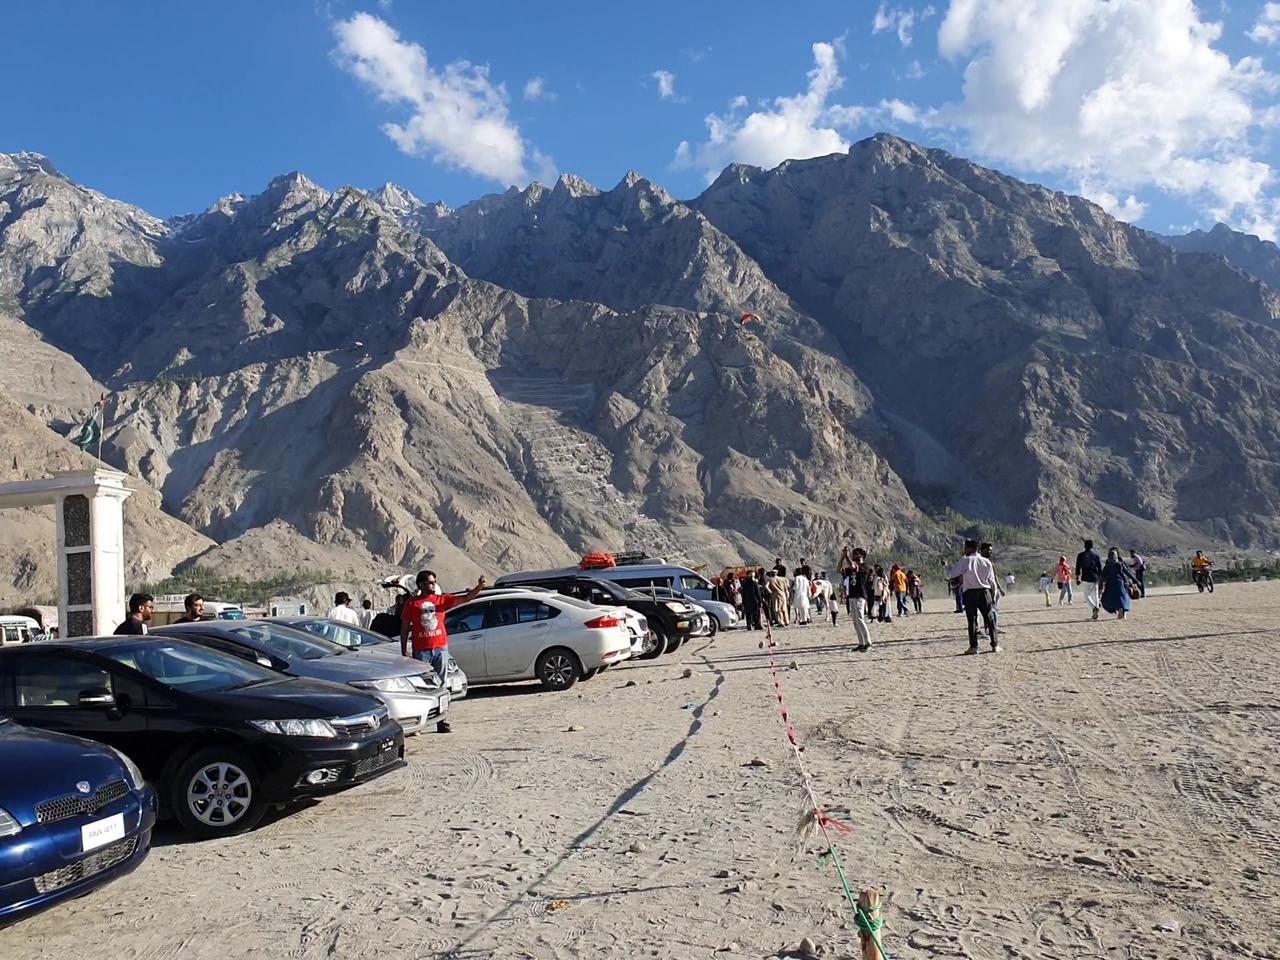 The Coldest desert in the world? Pakistan becoming Number 1 Tourist Destination In the World?